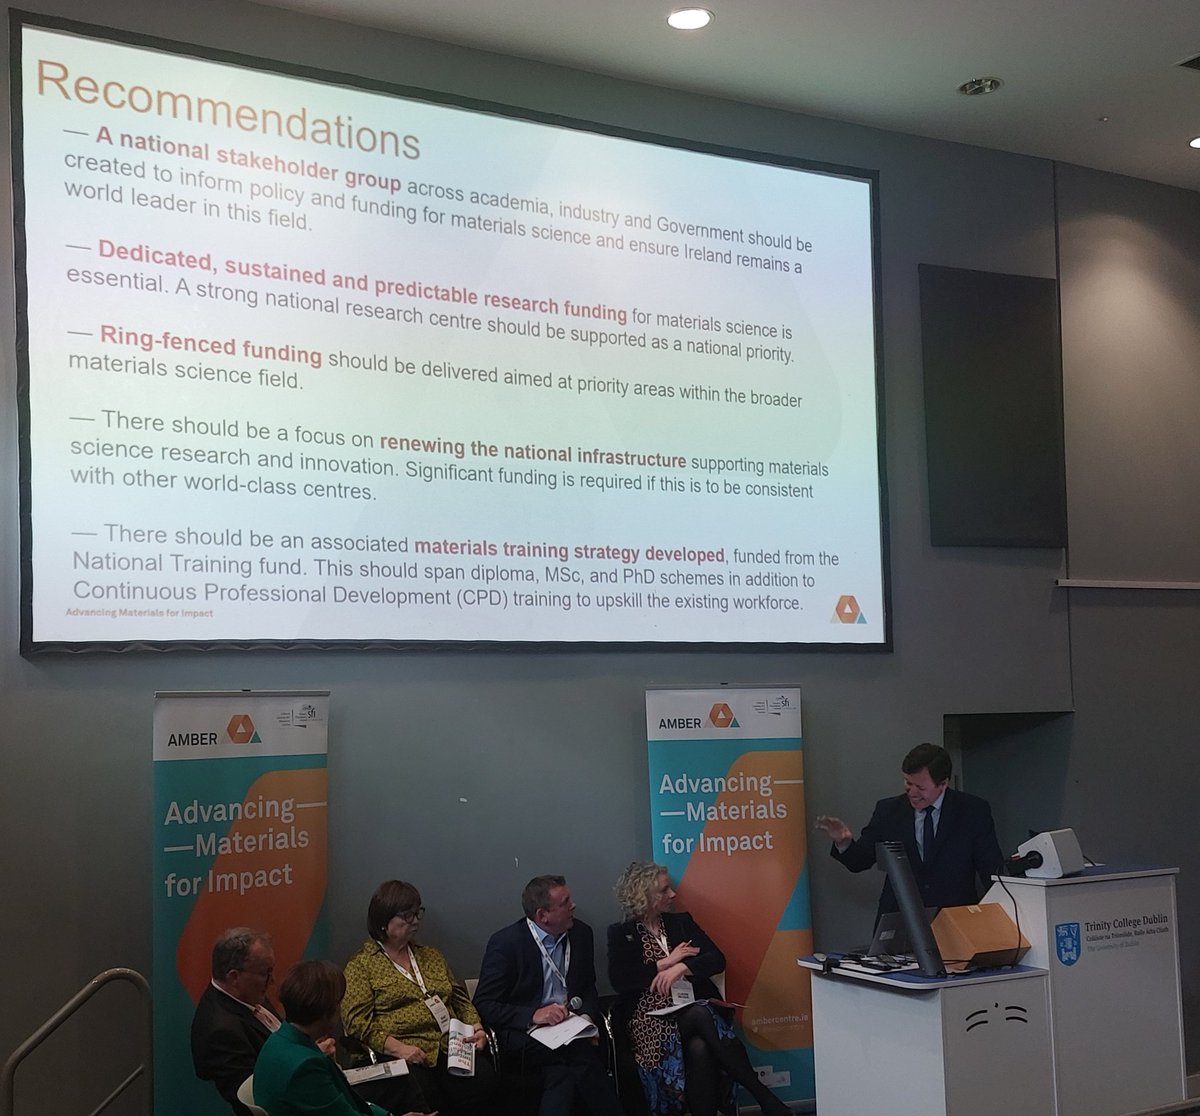 Great to attend today the Amber's paper Launch of 'The importance of Advanced Materials in Ireland' . 5 Recommendations highlighted and aligned well to the EU Adv. Mat. recent Communication #RawMaterialsAct @EI_SOReilly @EI_BFlynn @ambercentre